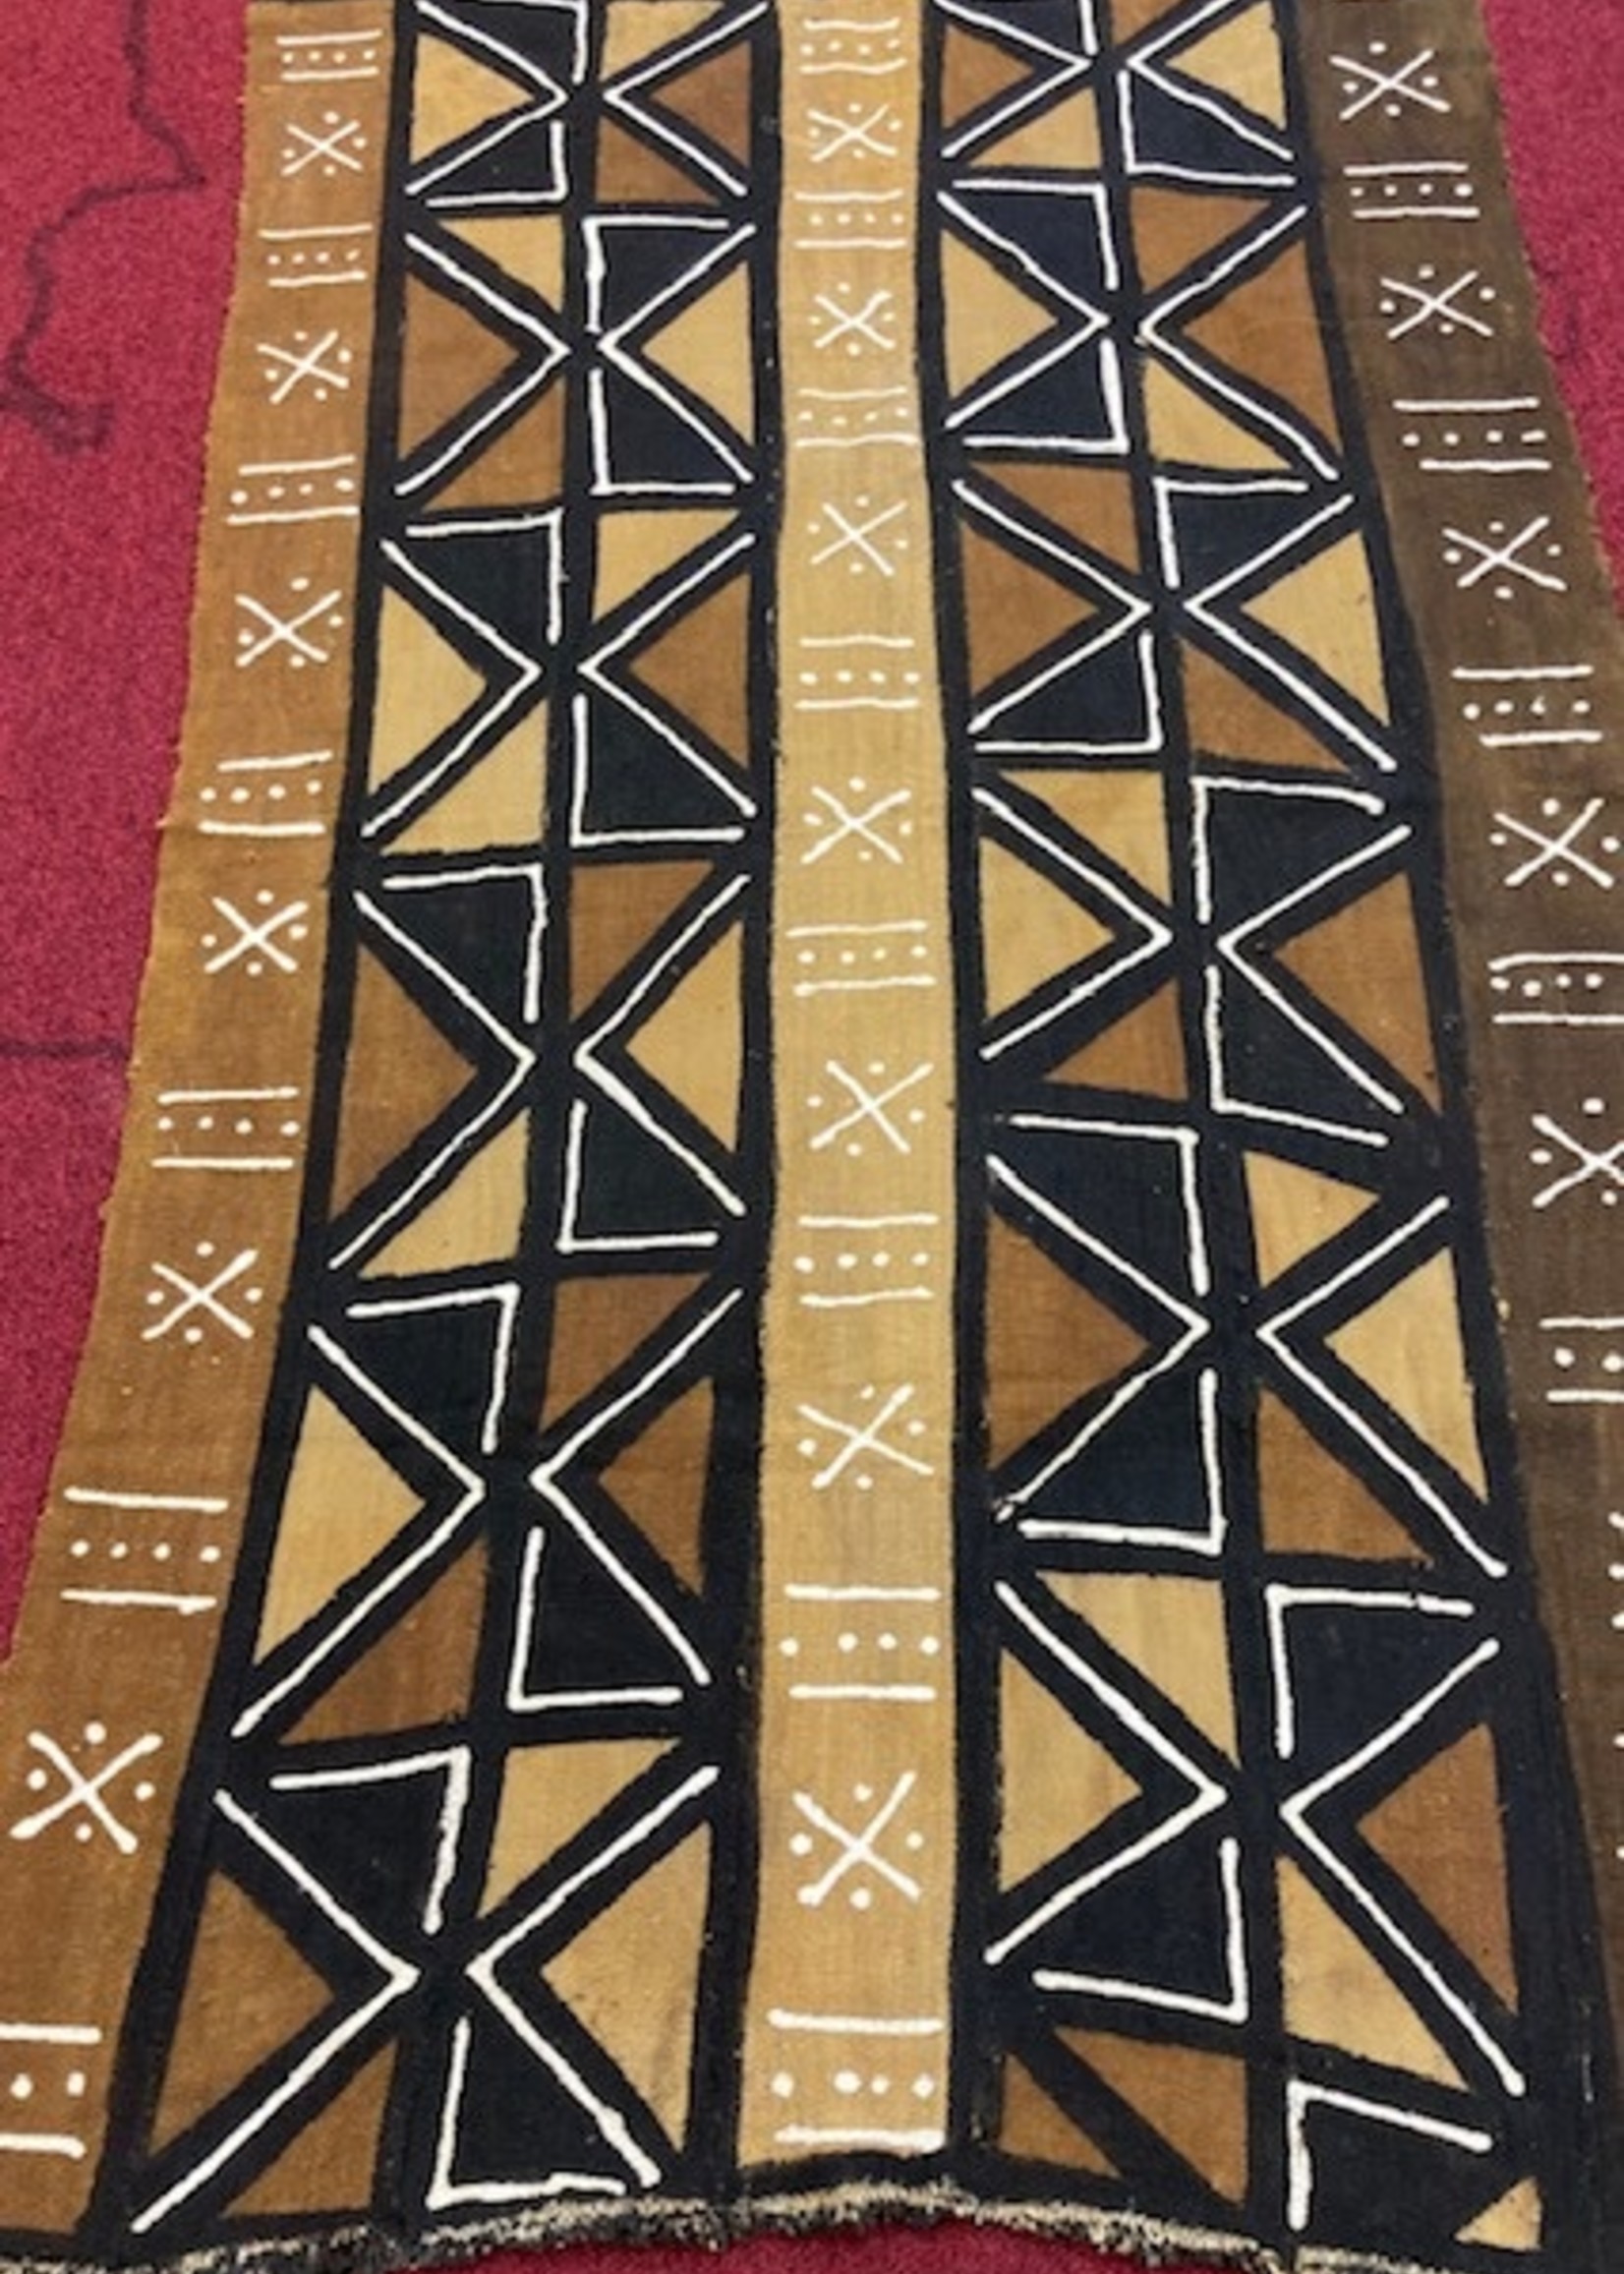 Mali Mudcloth Fabric. Handmade in Mali. 100% Cotton. Sizes vary: 38-45in Wide, 63-68in Long. For Clothing and Decorating